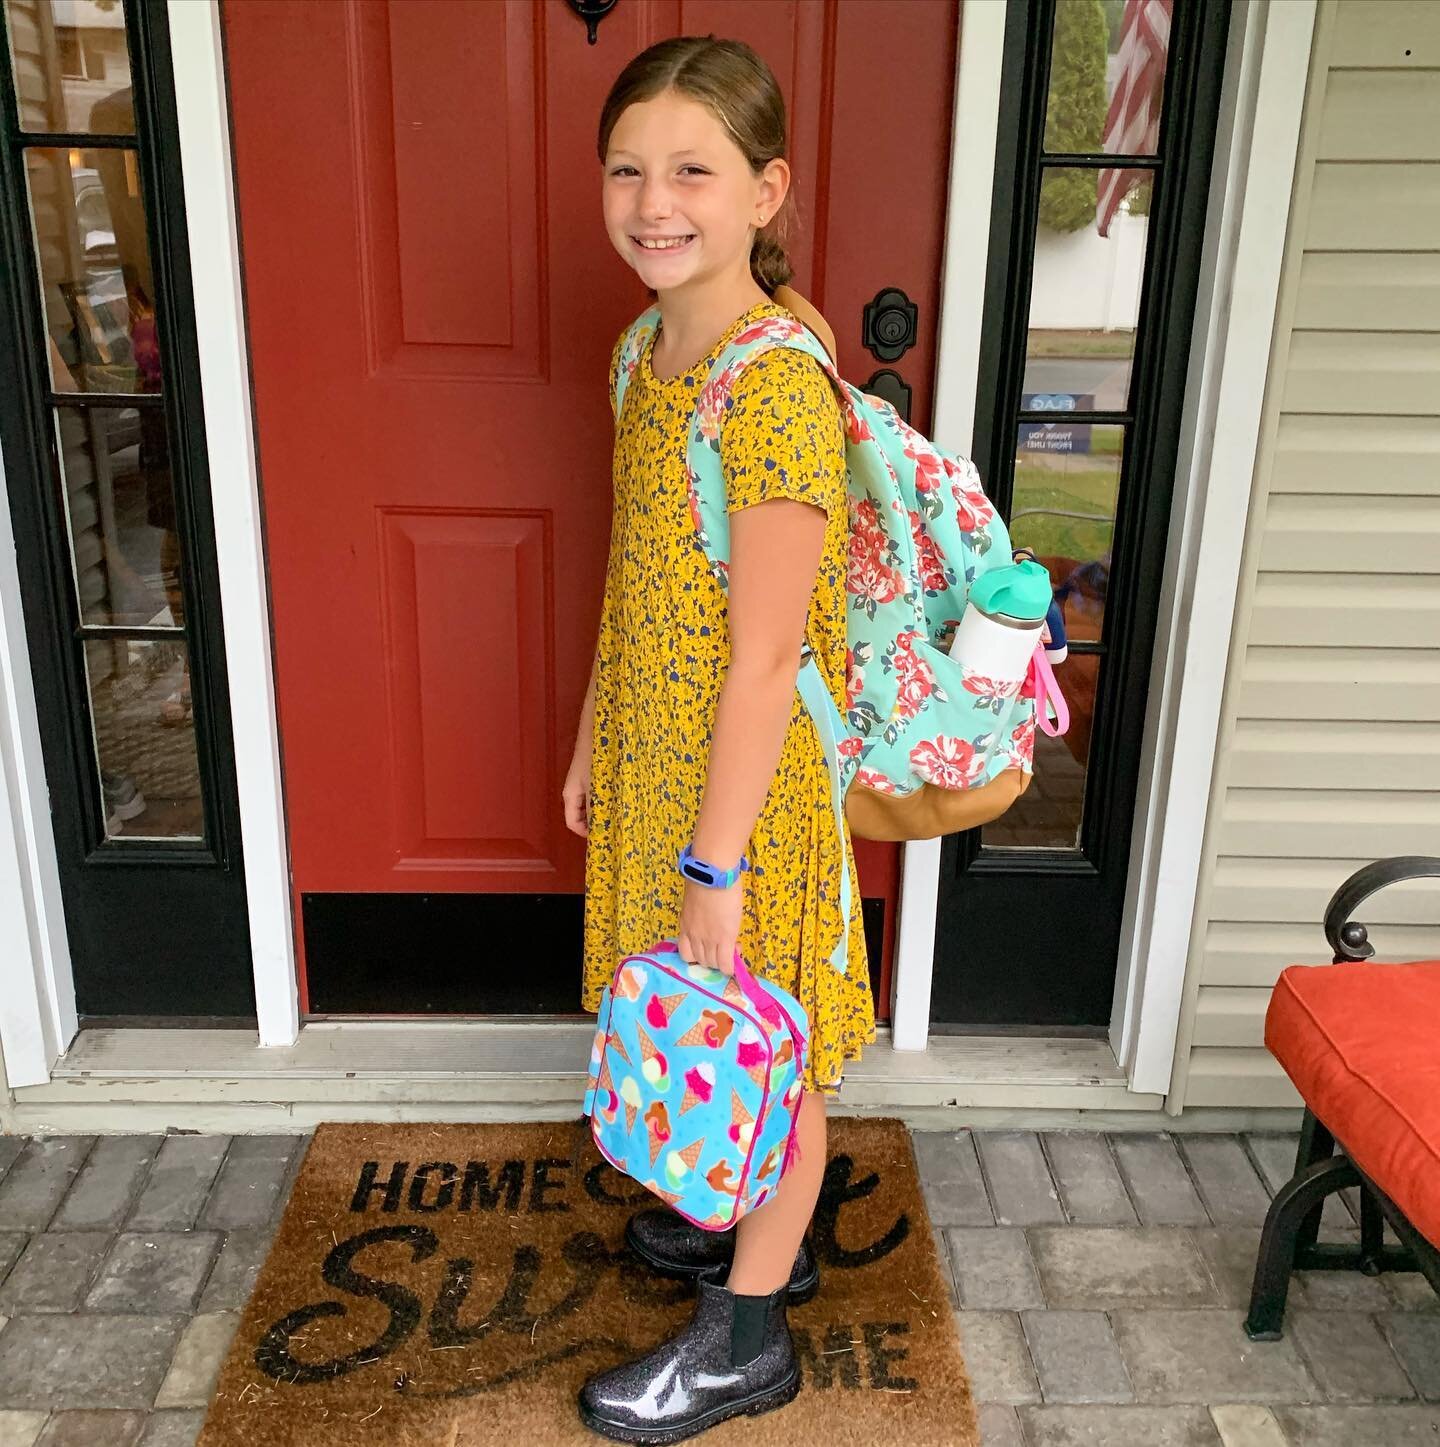 First Day of School 2022 💙💛

Another school year starting on the rainiest day but these kids didn&rsquo;t care. 4th grade for P and Kindergarten for H!

As always, I&rsquo;m the only one who&rsquo;s not ready for this next chapter but I&rsquo;m sur